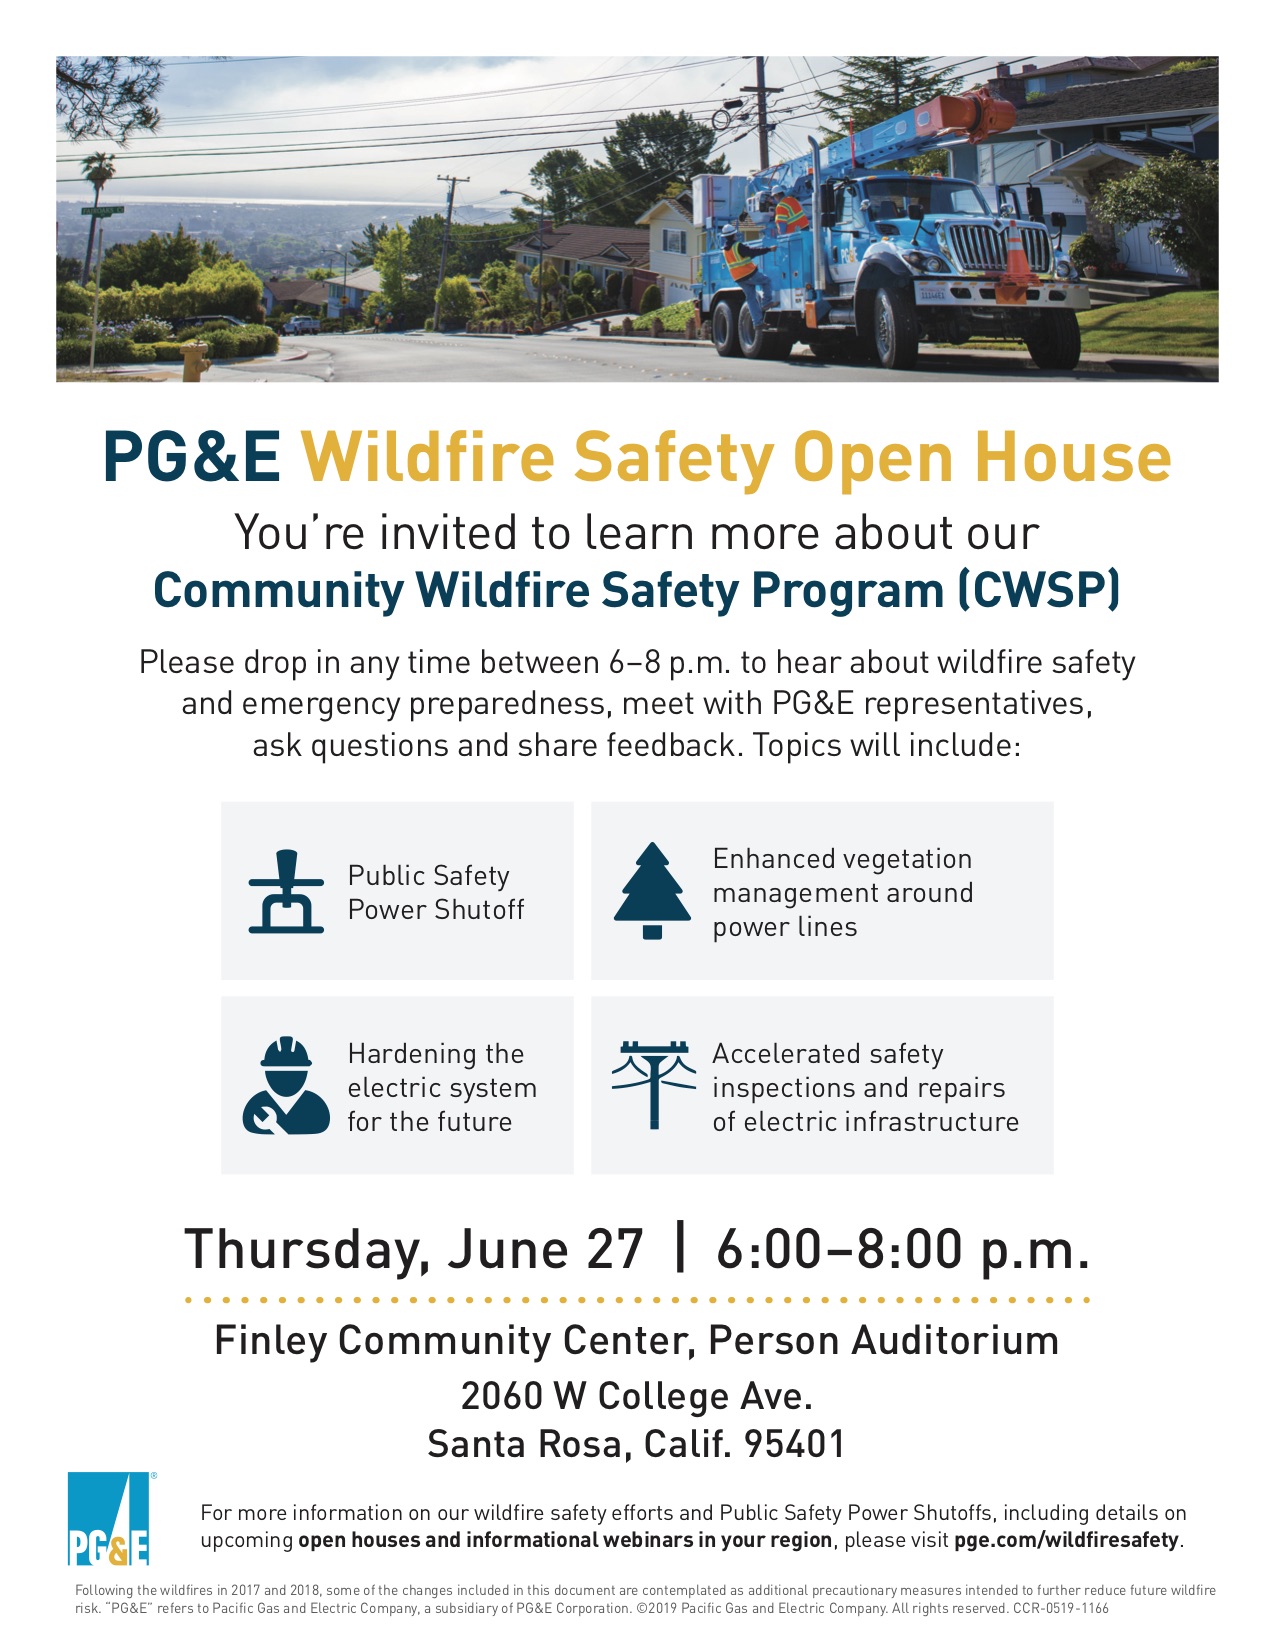 PG&E Wildfire Safety Open House June 27, 2019